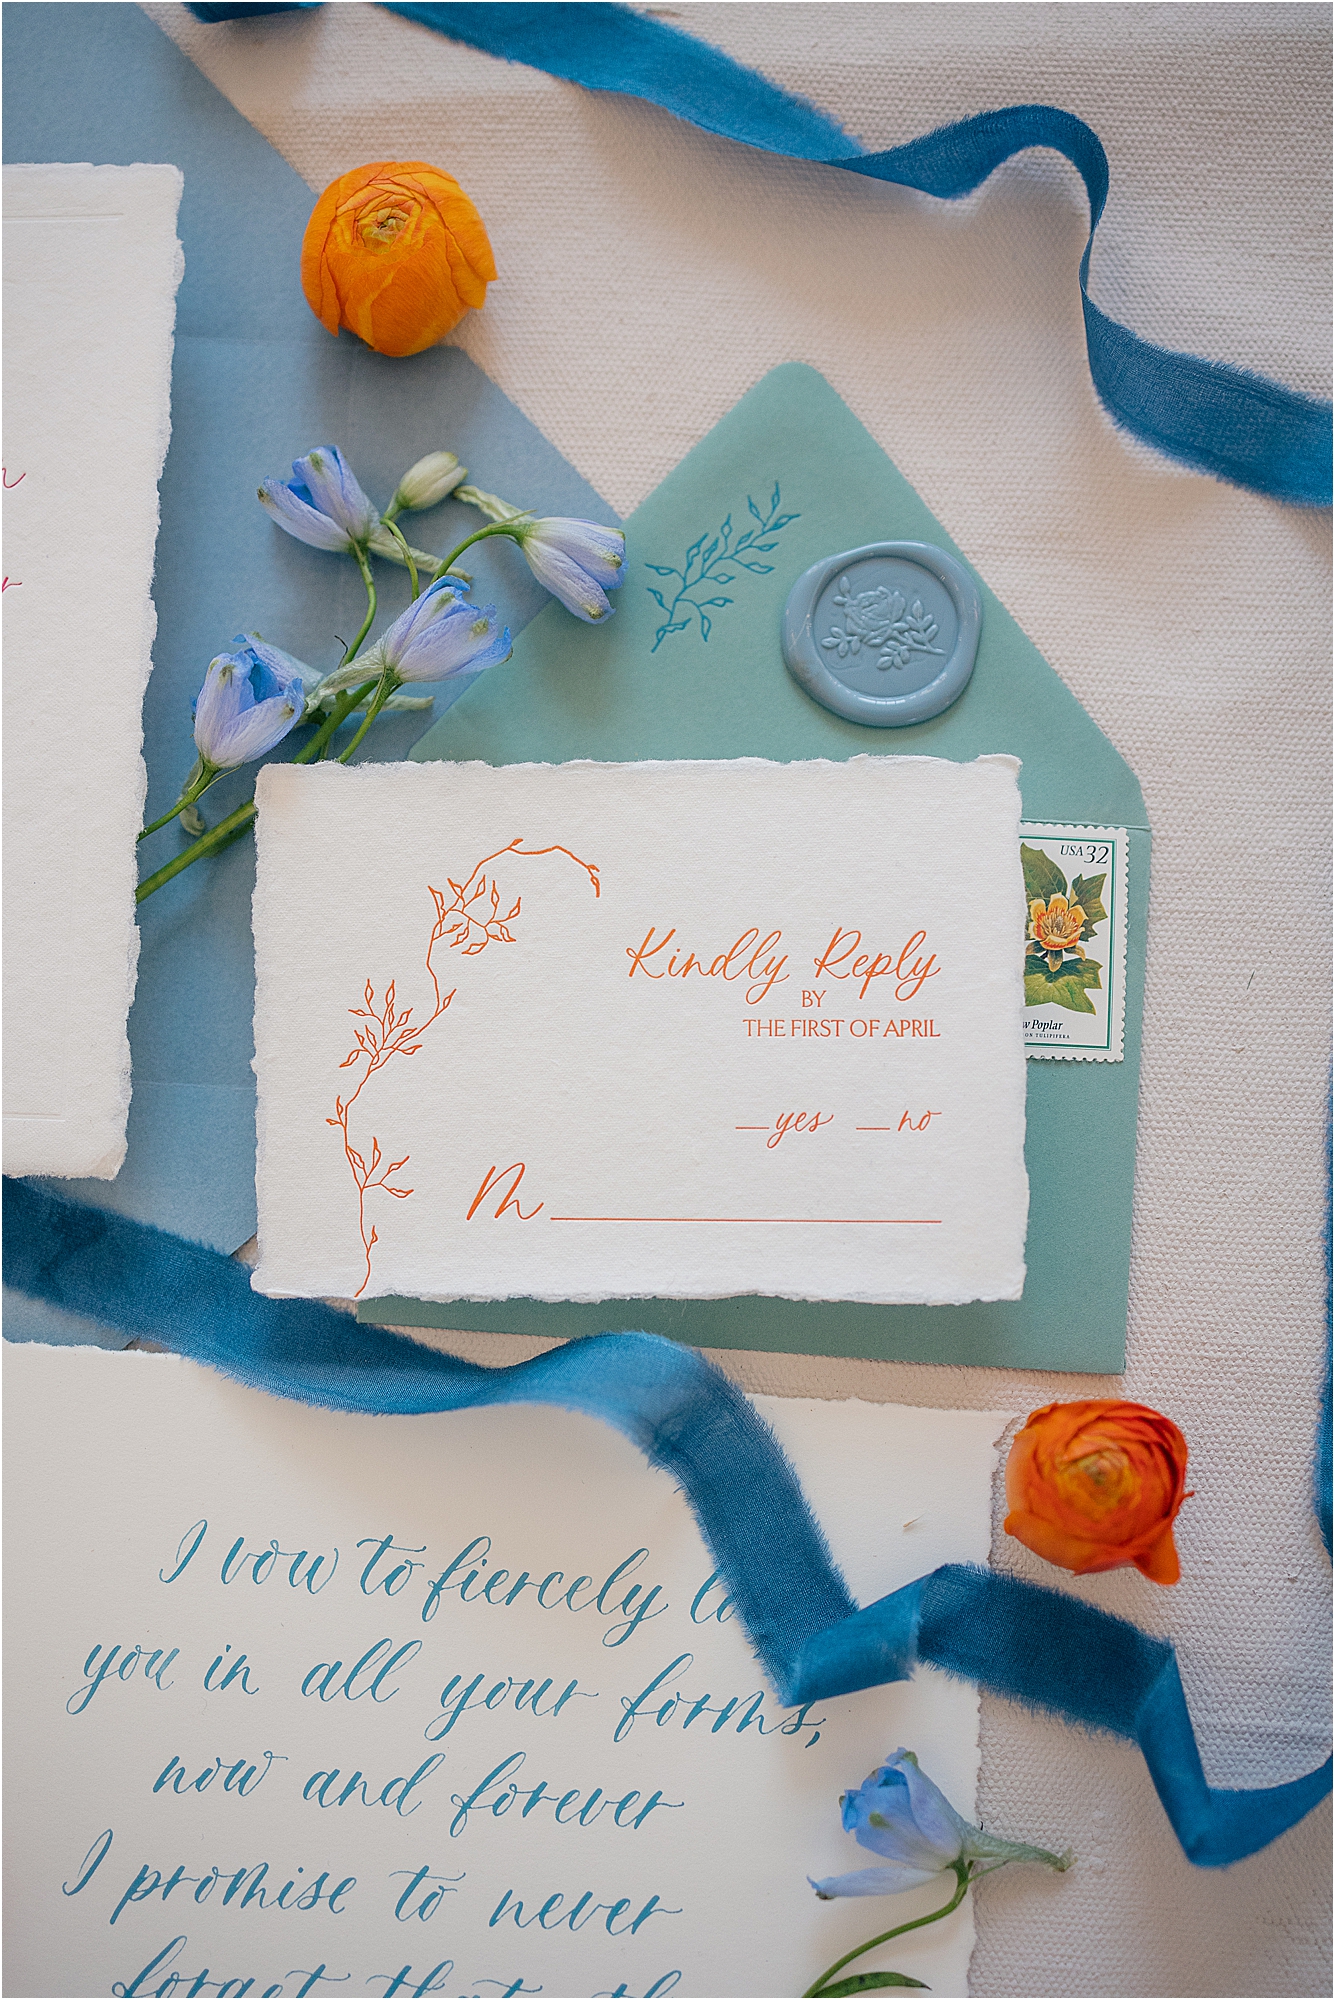 why I want to photograph your wedding invitation